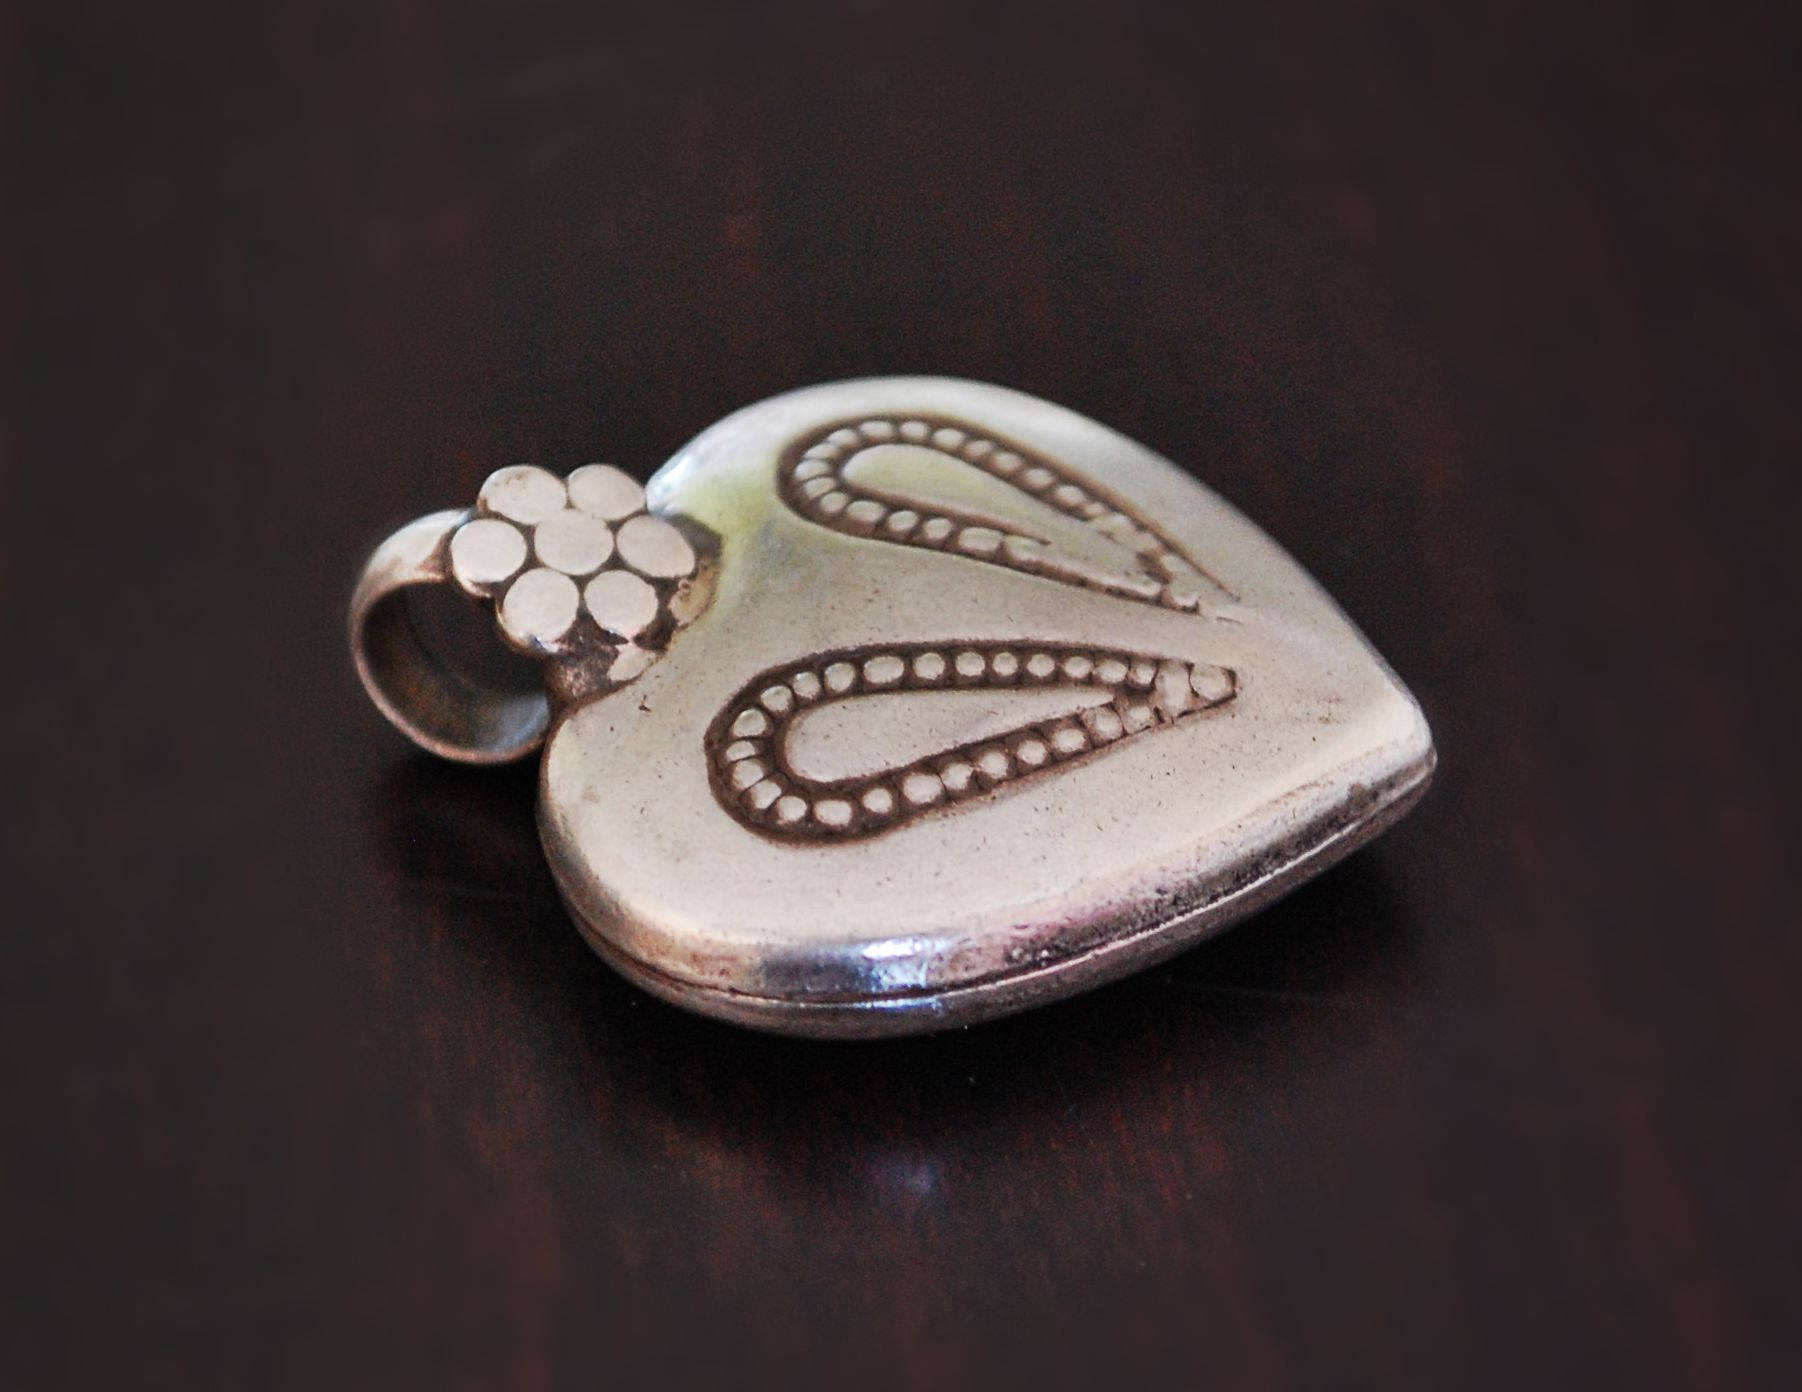 Old Rajasthan Silver Amulet - Tribal Indian Heart Pendant - Tribal Rajasthan Pendant - Tribal Heart Pendant - Gypsy Boho Silver Pendant